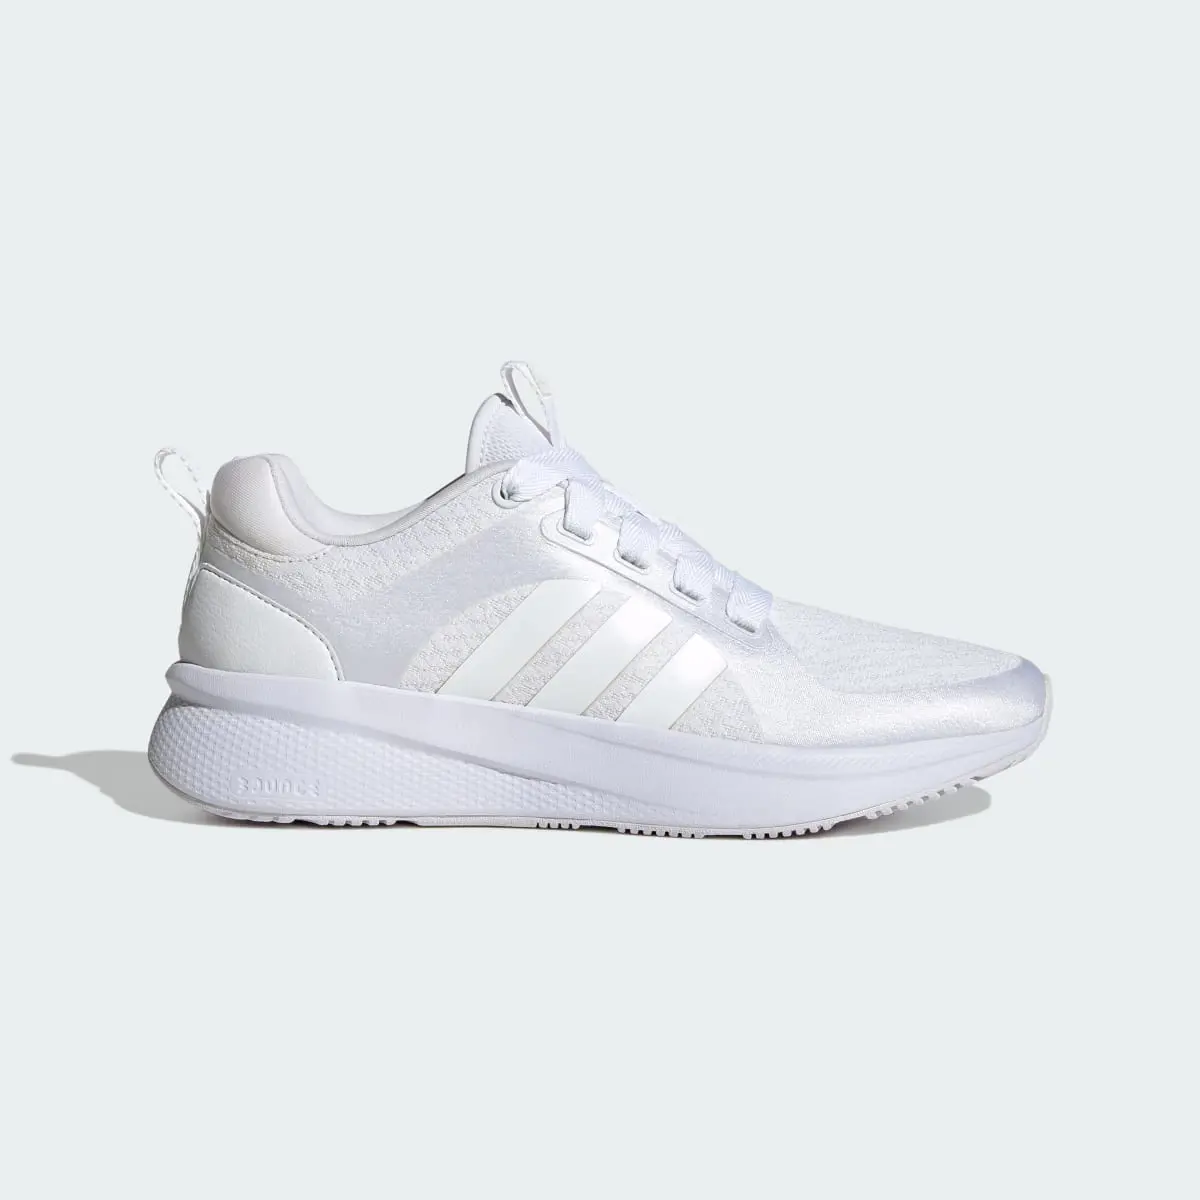 Adidas Edge Lux 6.0 Shoes. 2